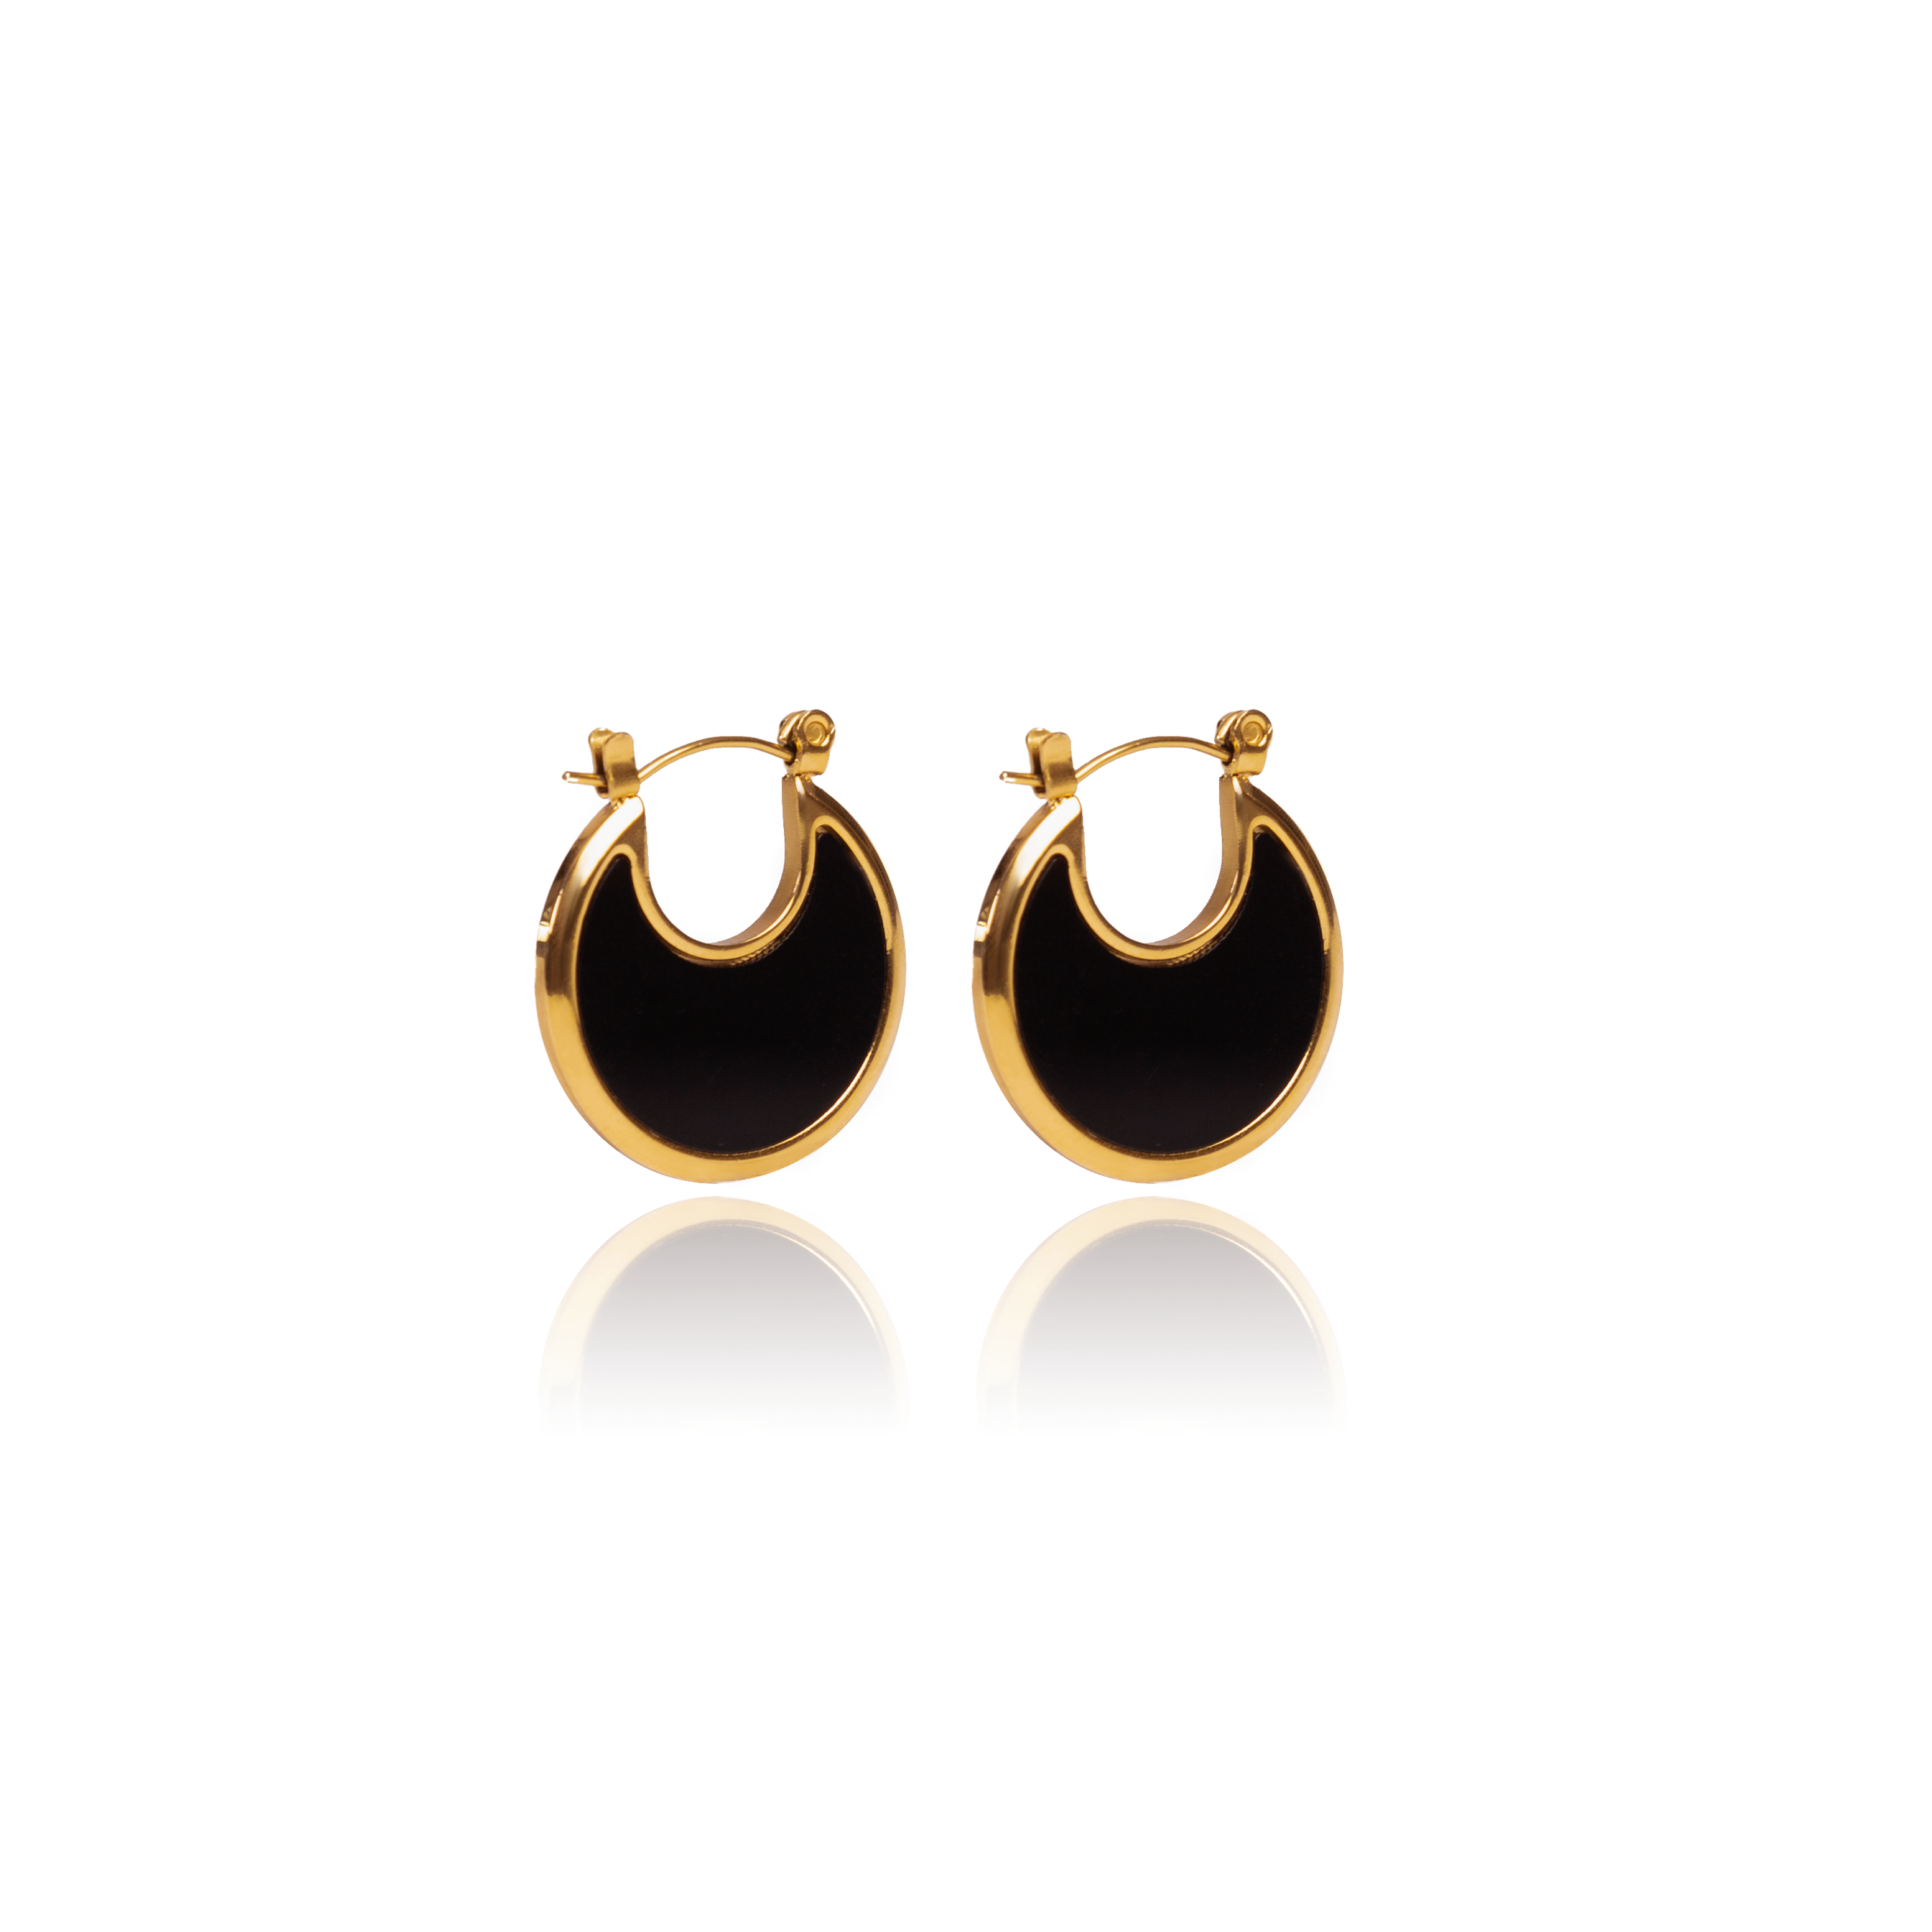 An ultra-classic earrings are made to enhance nearly every look. From an evening gown to casual jeans and a tee, you'll never want to leave home without them.  18K gold plated on stainless steel.  Diameter: 22mm Thickness: 2mm